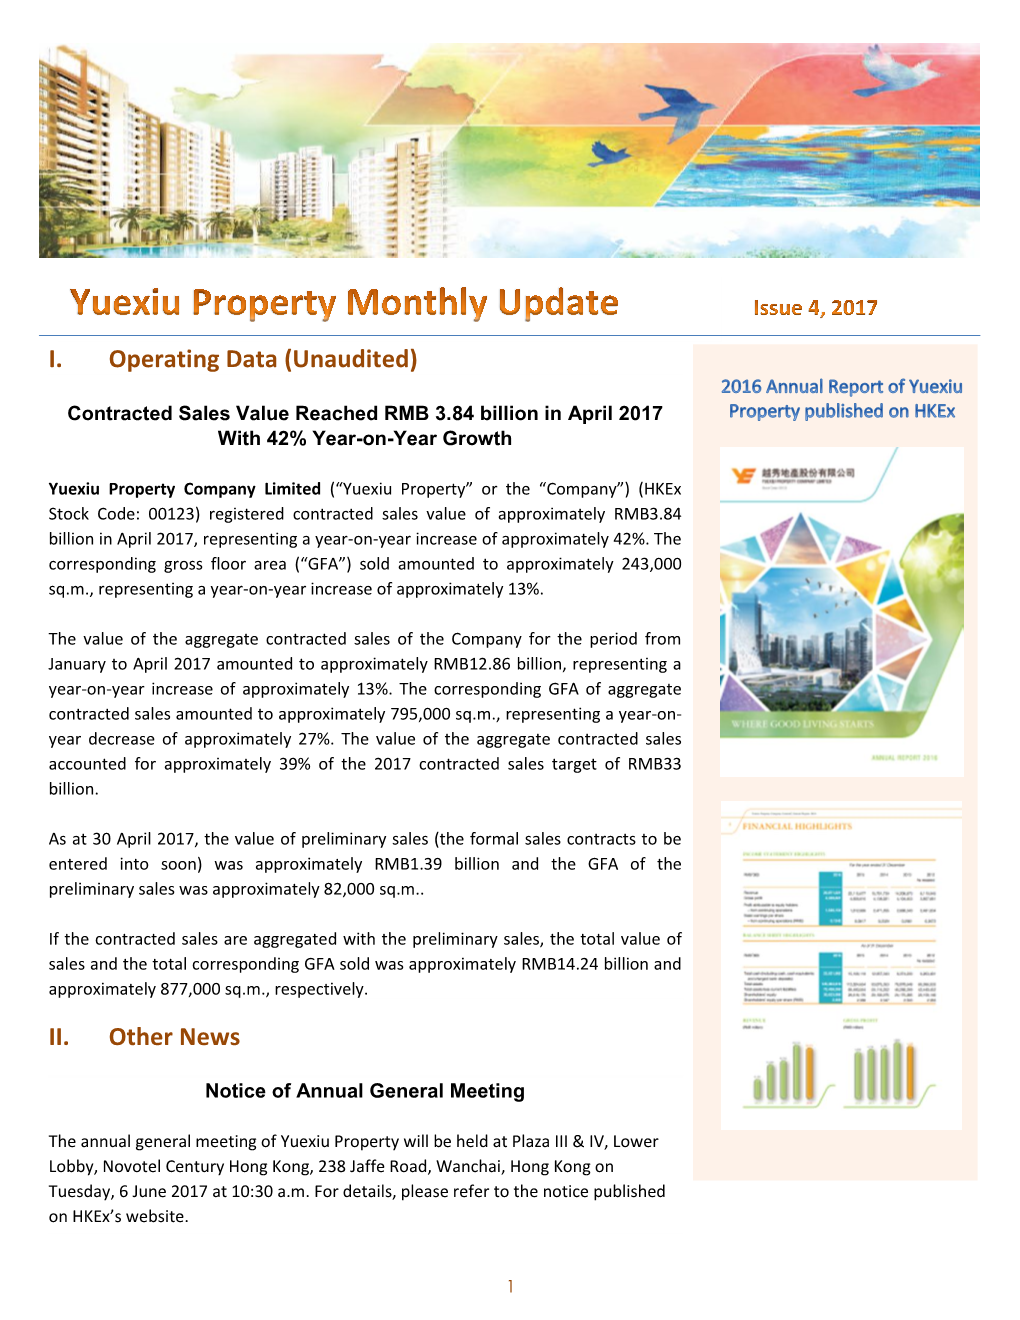 Yuexiu Property Monthly Updates Issue 4, 2017